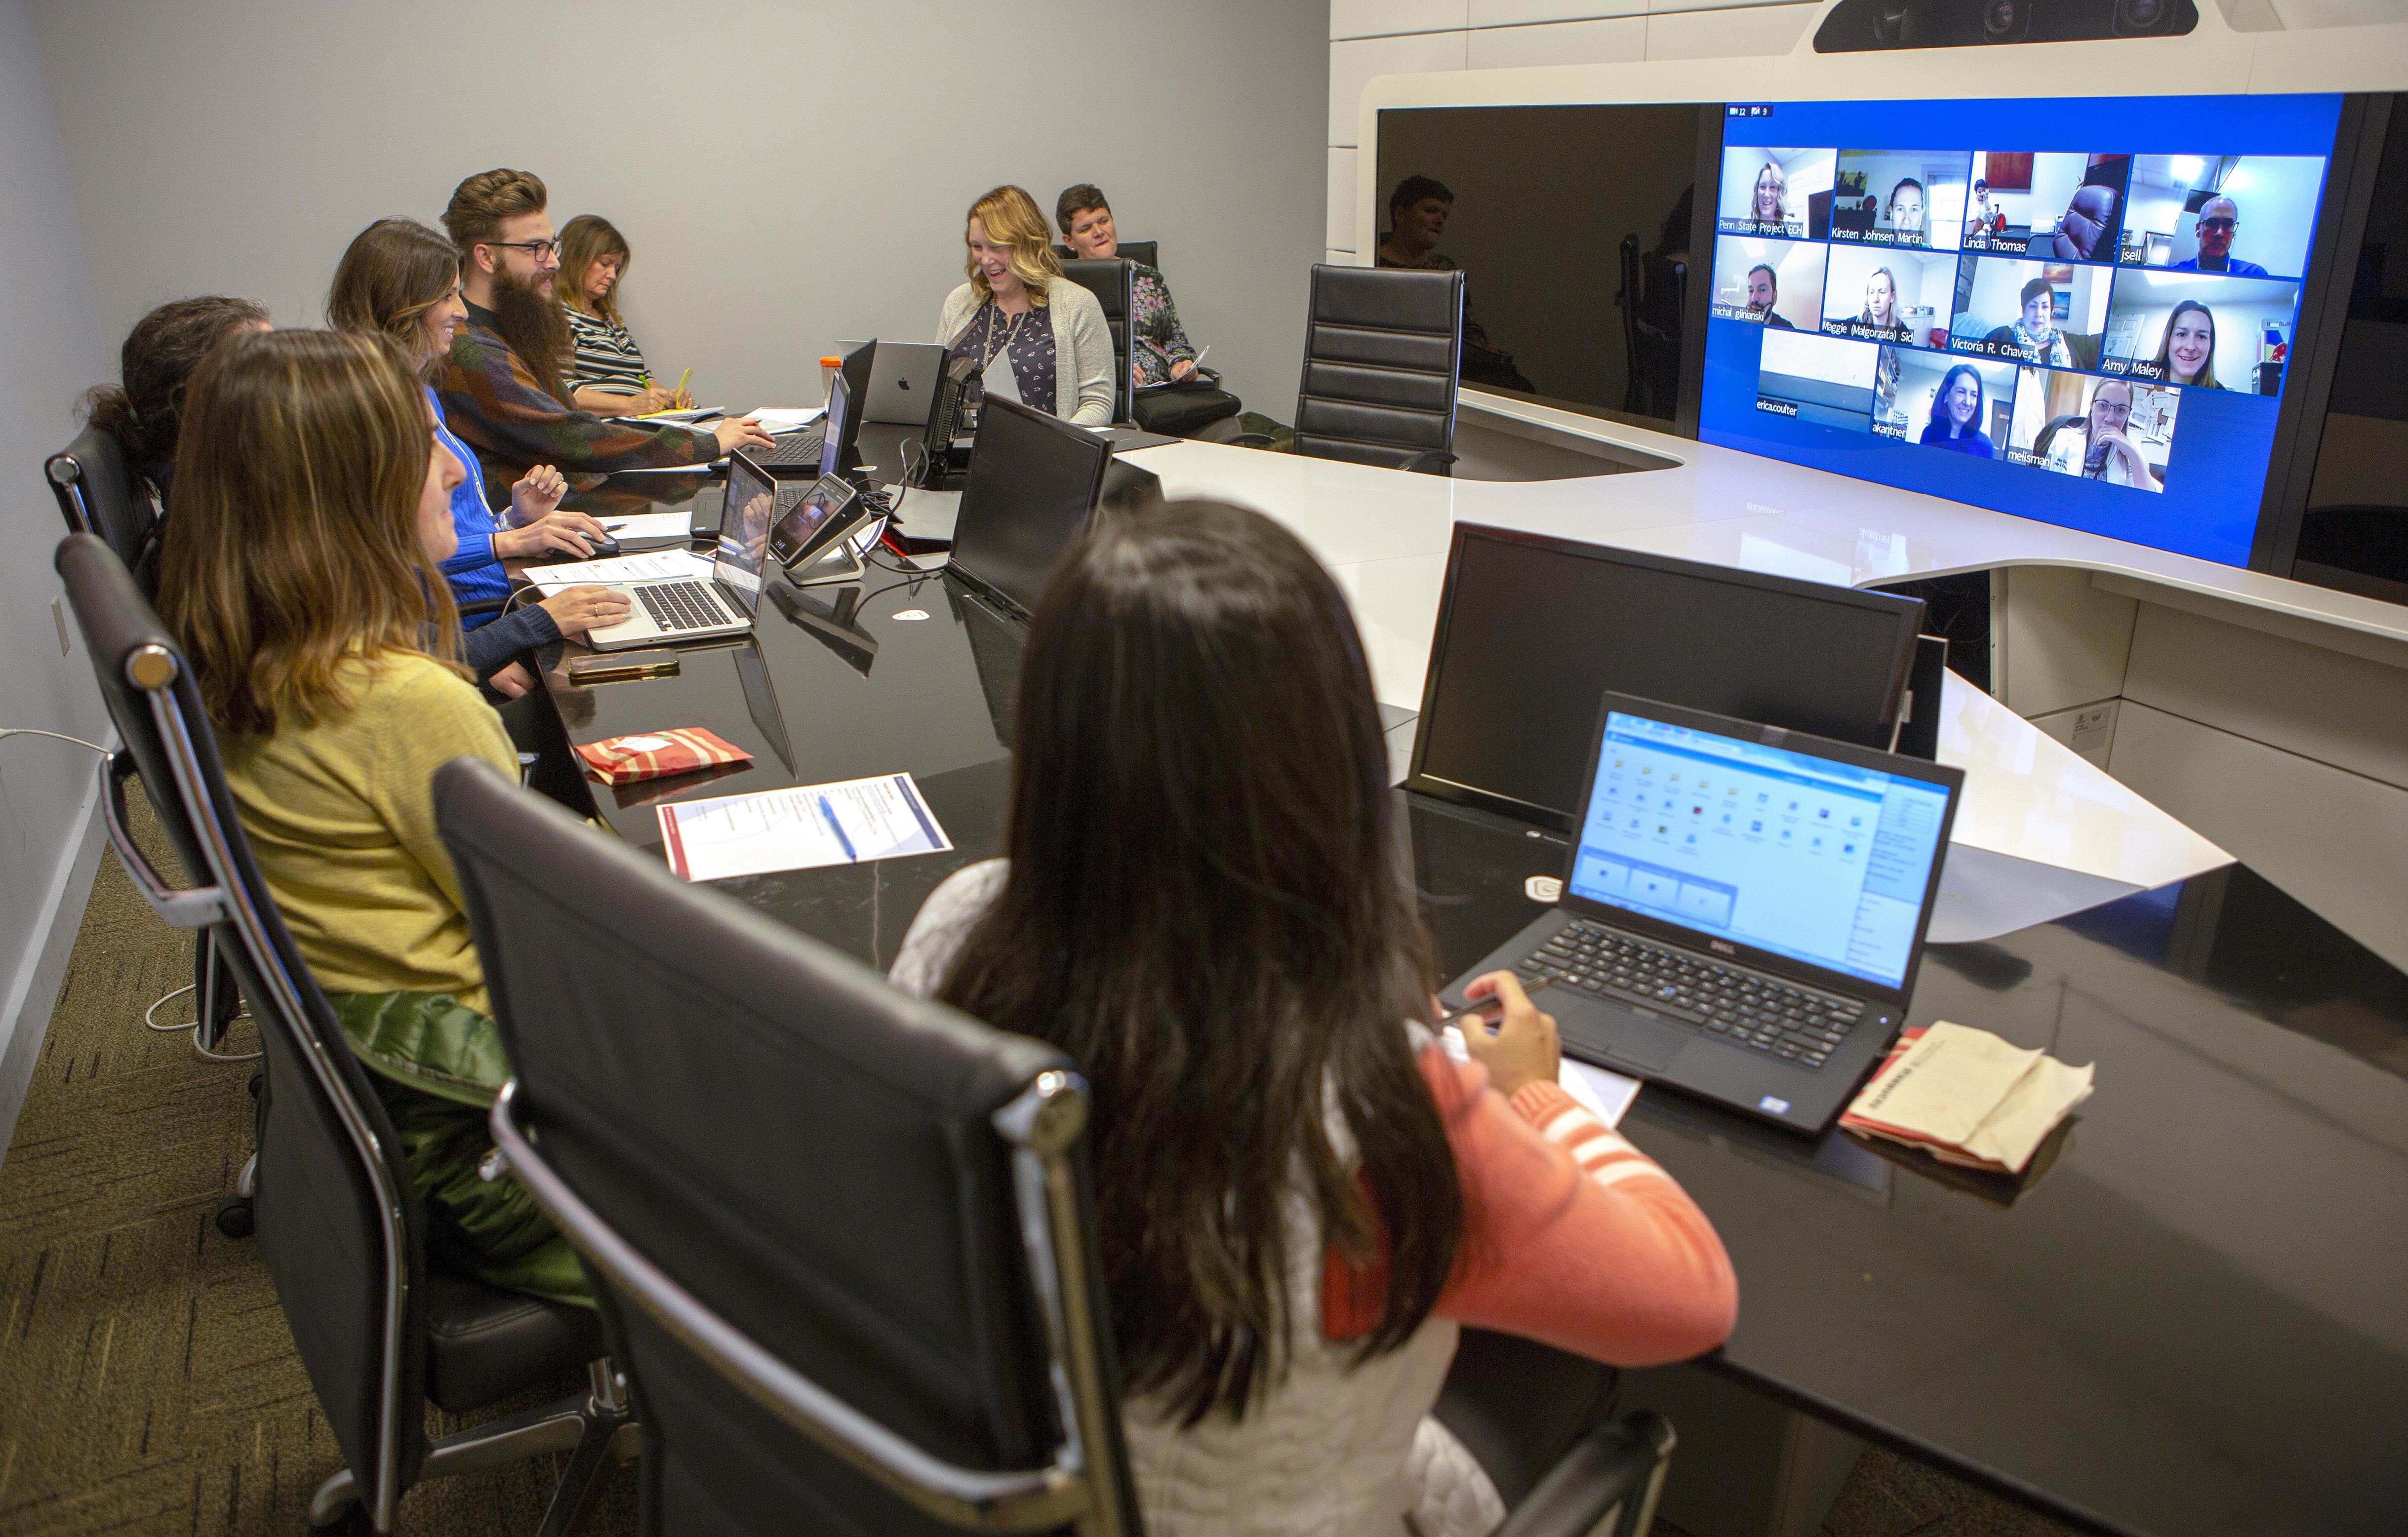 A long office table has eight people seated on one side and at its head. They have laptops open in front of them and also face a screen projected onto a panel on the opposite wall. The projection shows a series of mini screens of other participants in the Project ECHO teleconference. People are smiling.